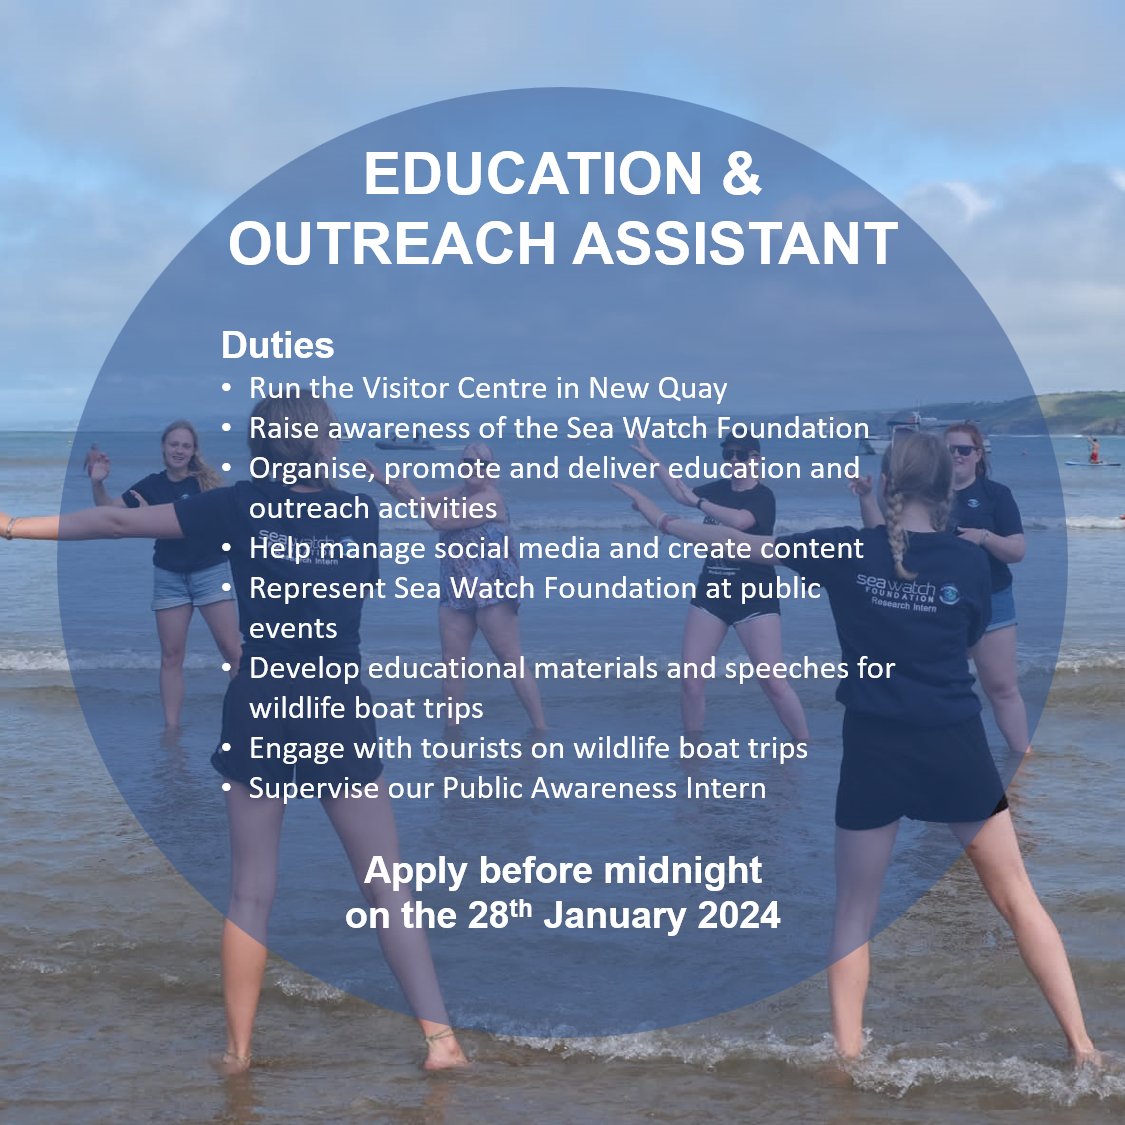 APPLICATIONS NOW OPEN It's that time of year again when we are looking for individuals to join our team of interns in Cardigan Bay! We are recruiting Research Interns, a Research Assistant & Intern Coordinator, and an Education & Outreach Assistant.